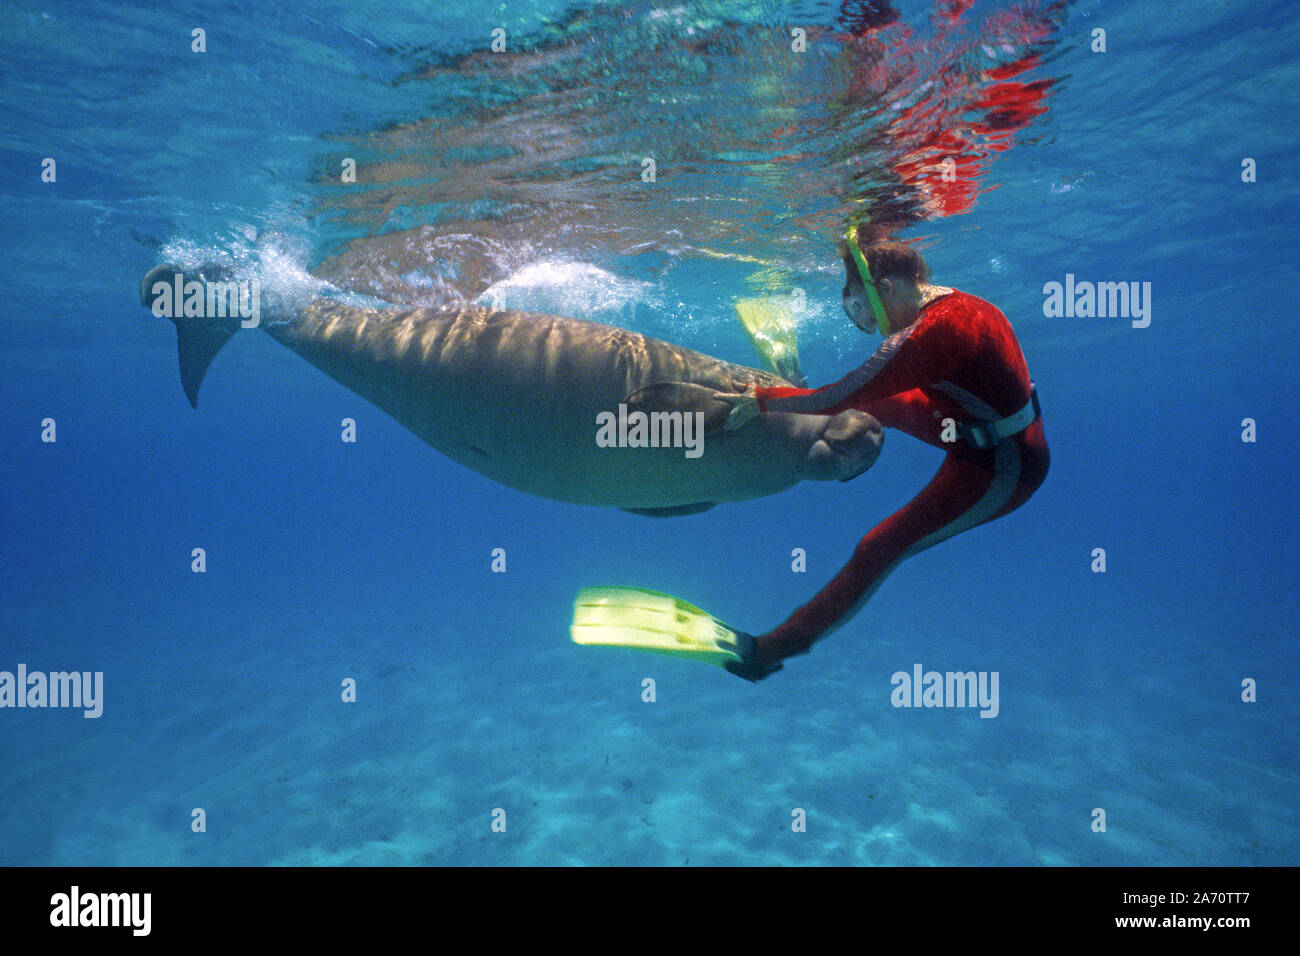 Snorkeller and Dugong (Dugong dugon), playing together, Borneo, Malaysia Stock Photo